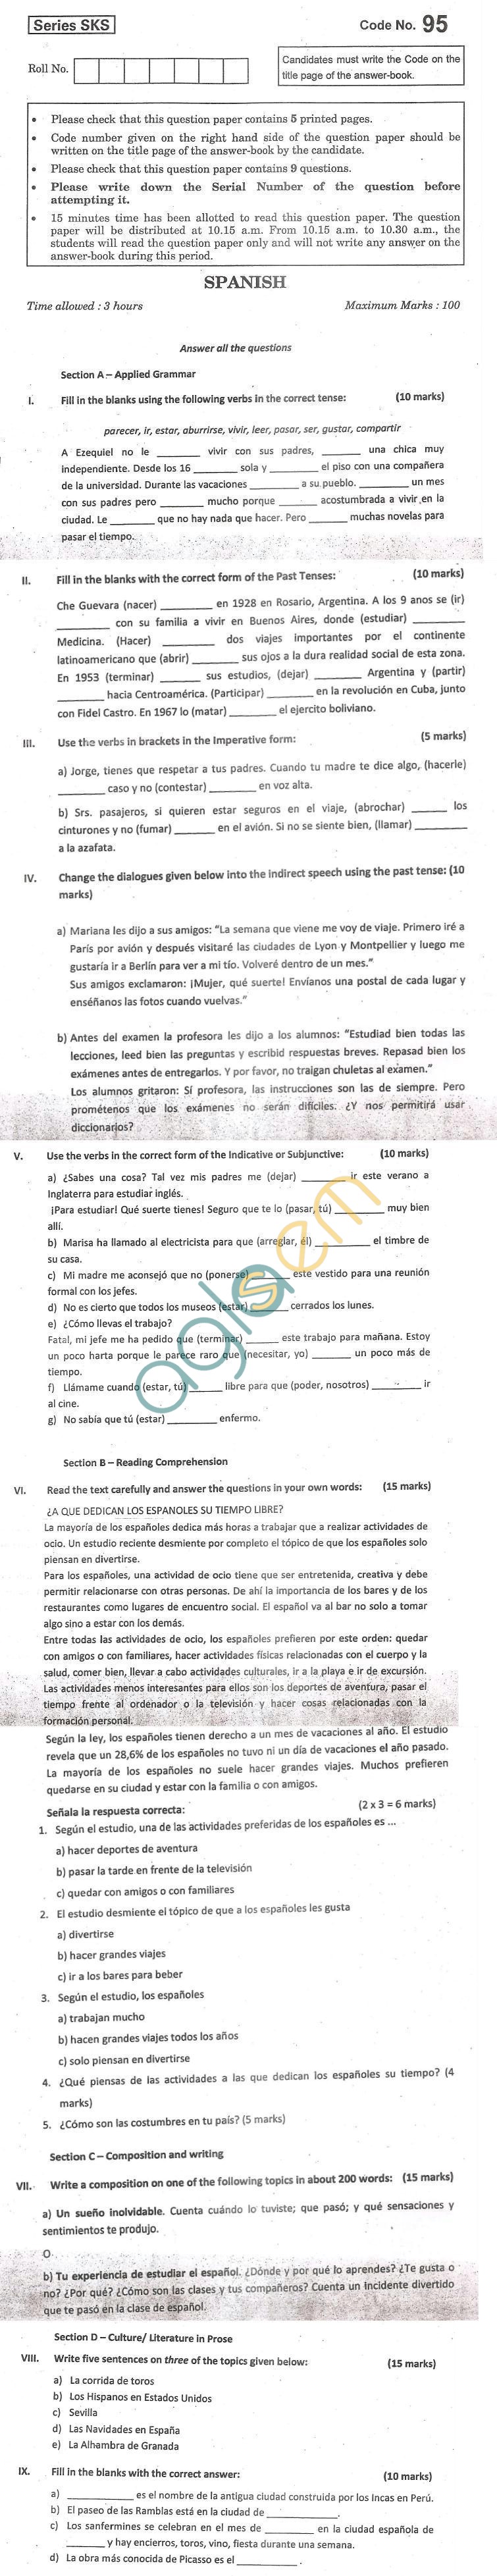 CBSE Board Exam 2013 Class XII Question Paper - Spanish